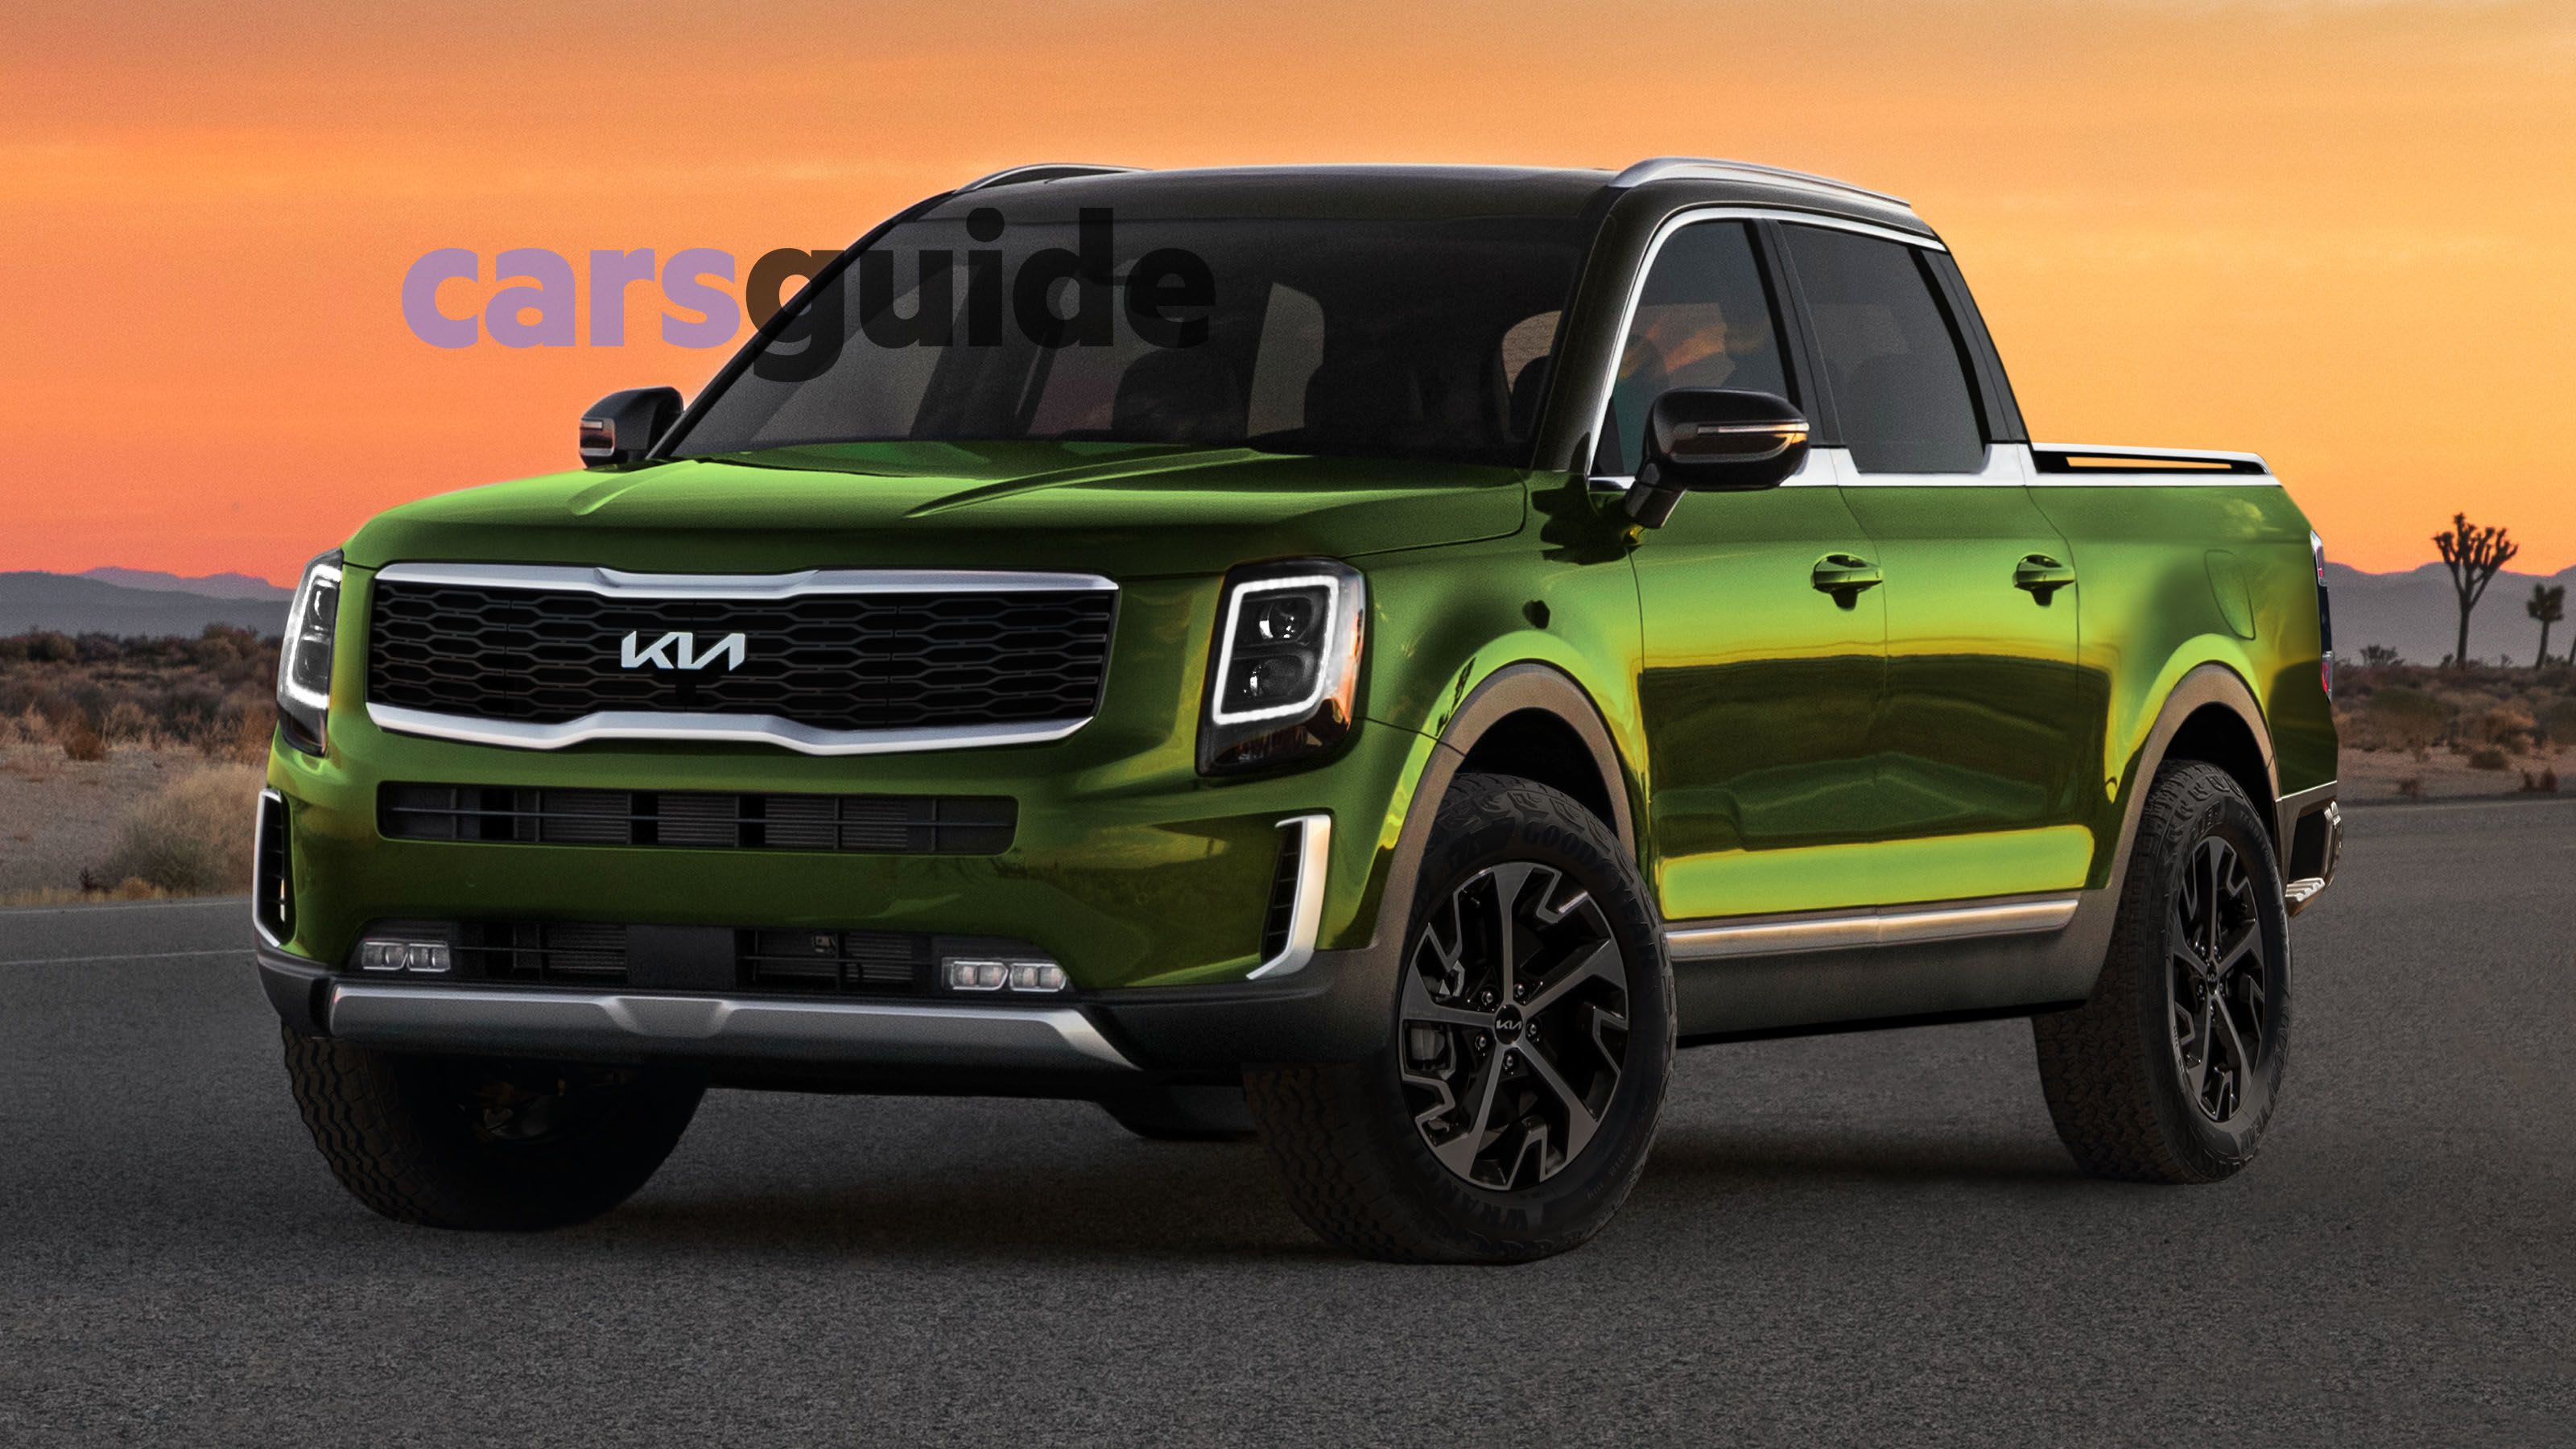 Waiting for the Kia ute? Here's the very latest on Korea's Ford Ranger